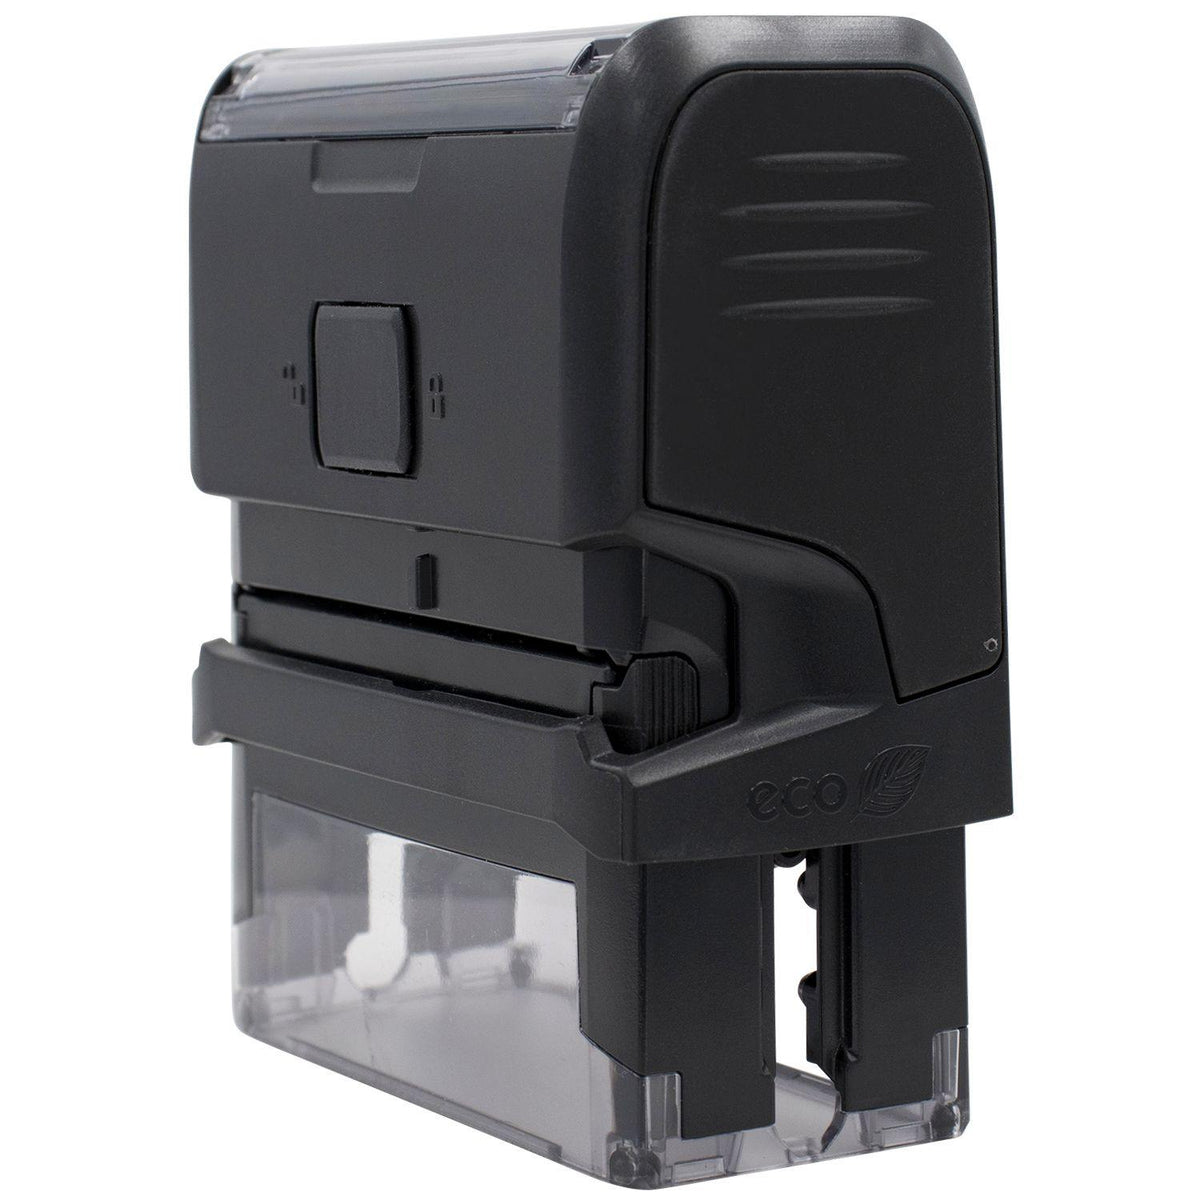 Self Inking Authorizations Revoked Stamp - Engineer Seal Stamps - Brand_Trodat, Impression Size_Small, Stamp Type_Self-Inking Stamp, Type of Use_Office